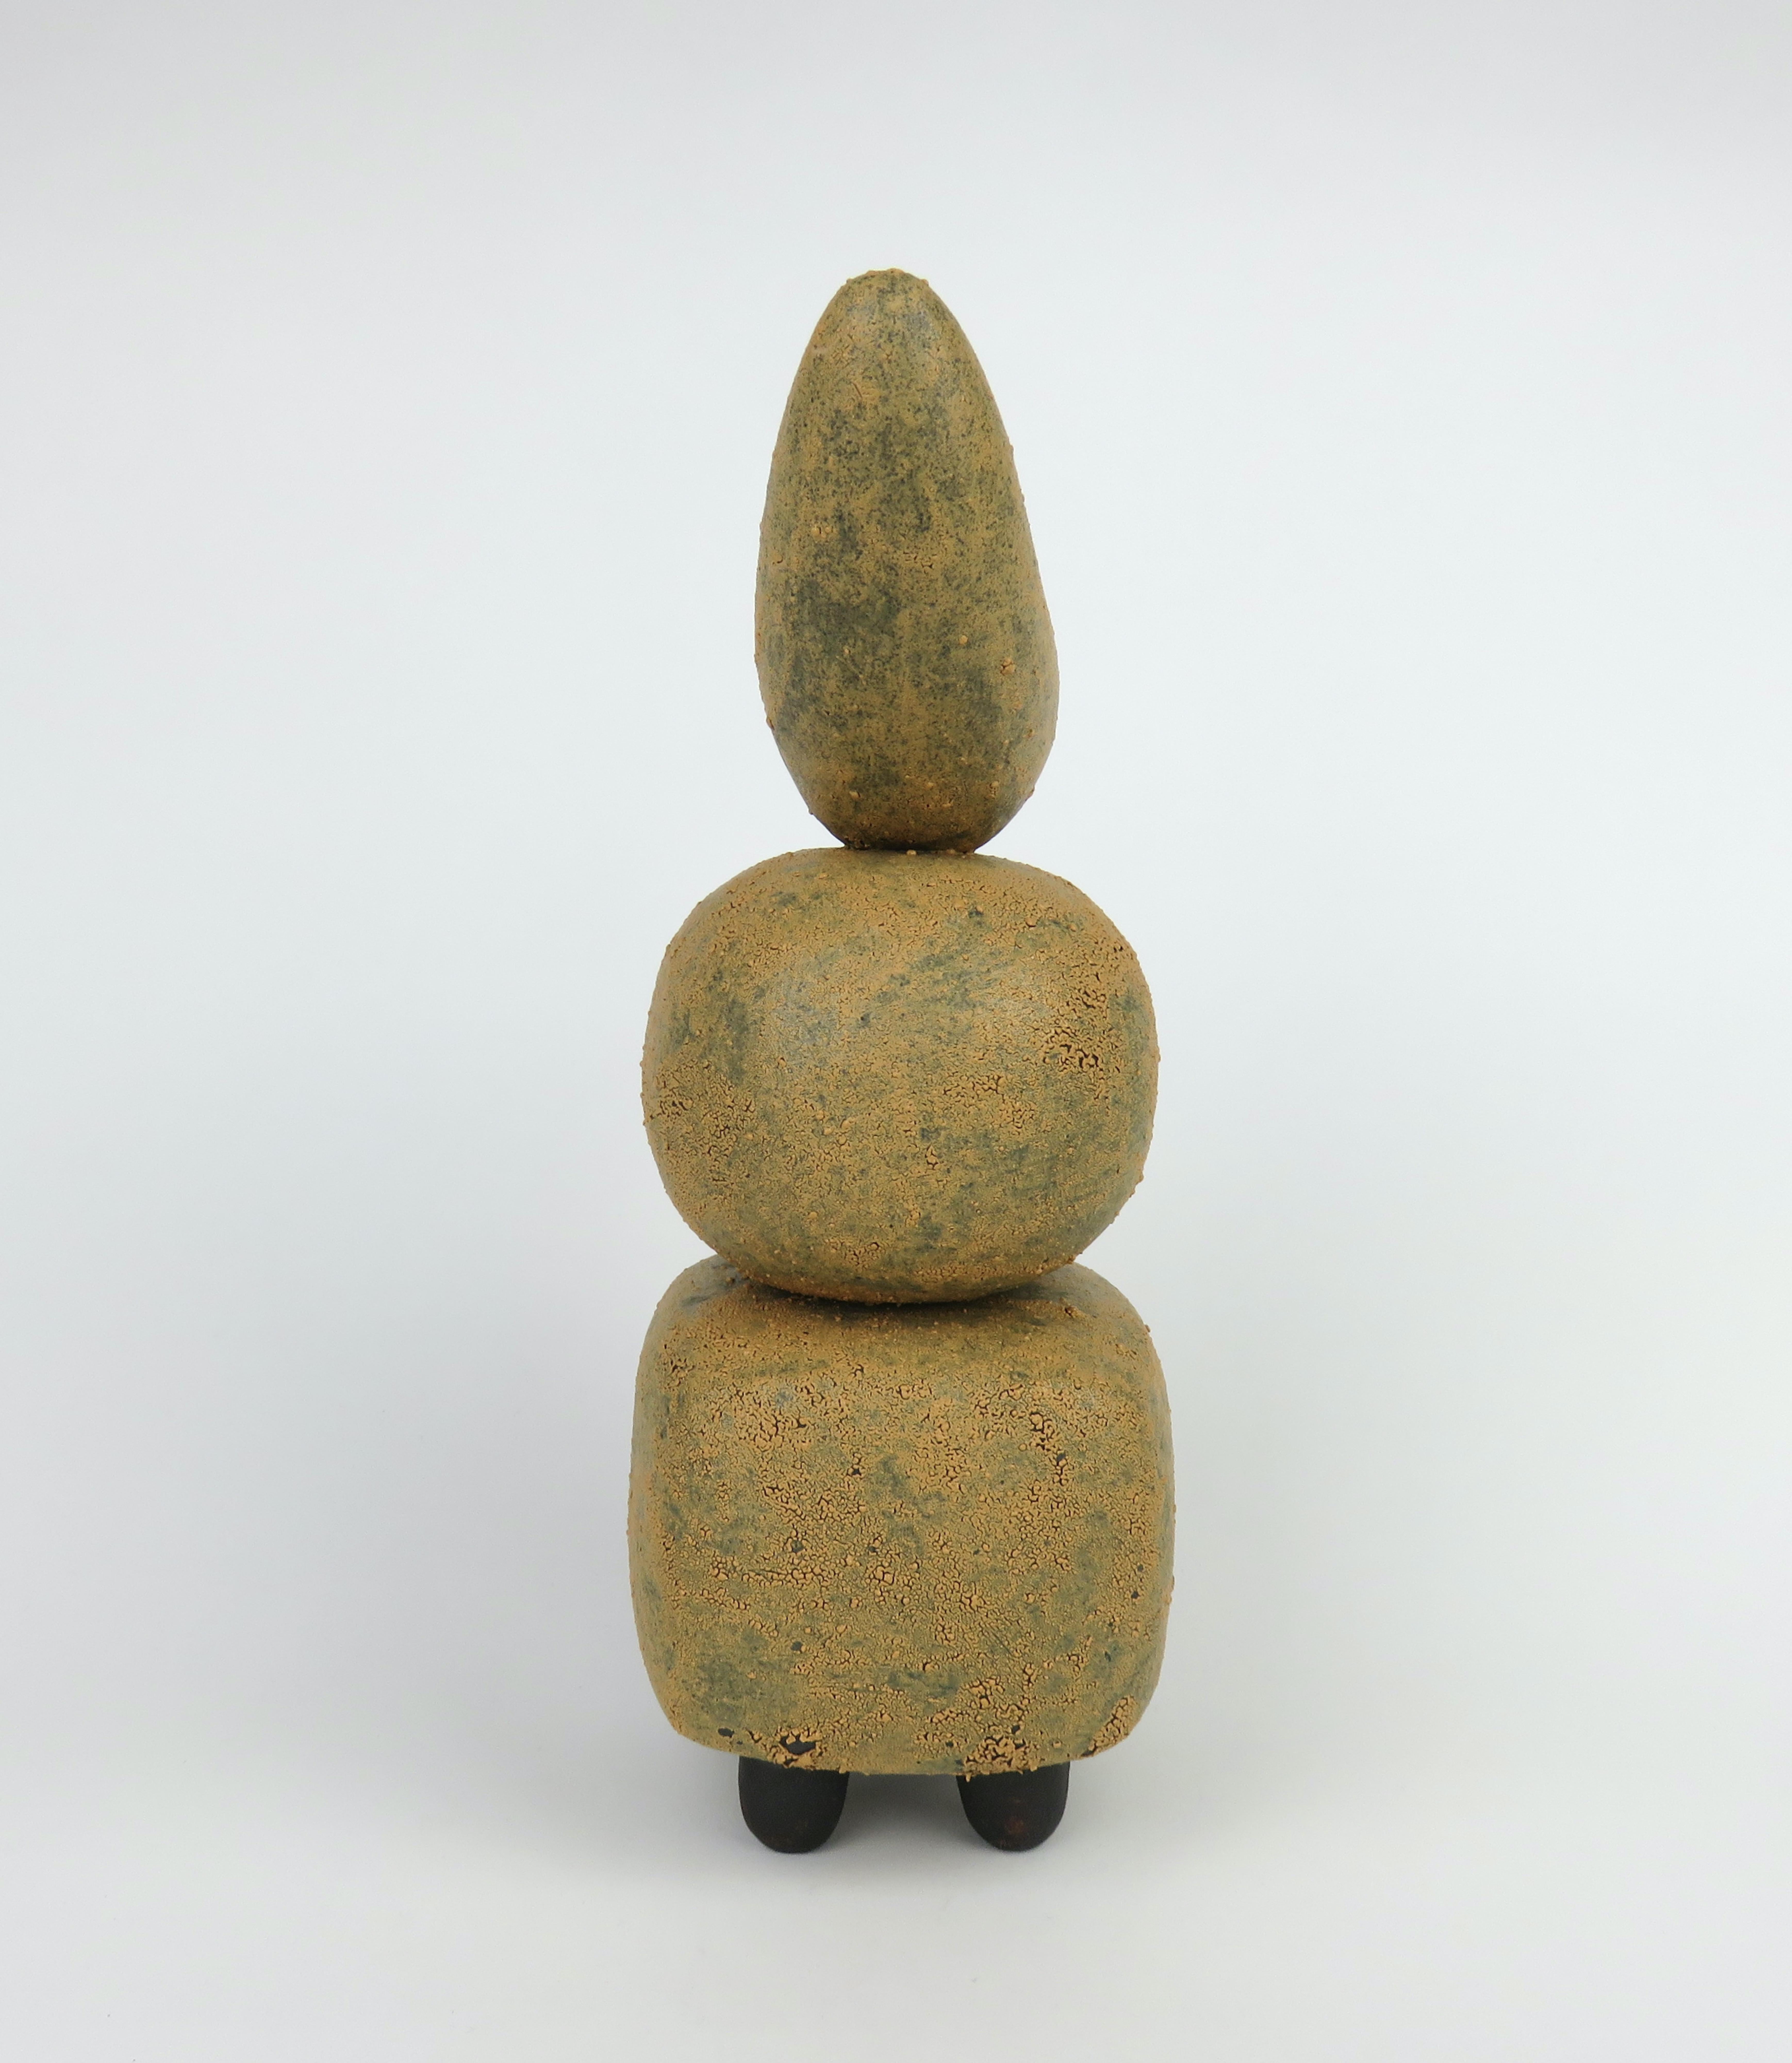 This 3-part crusty yellow-gold hand built ceramic TOTEM is a true gift from the 